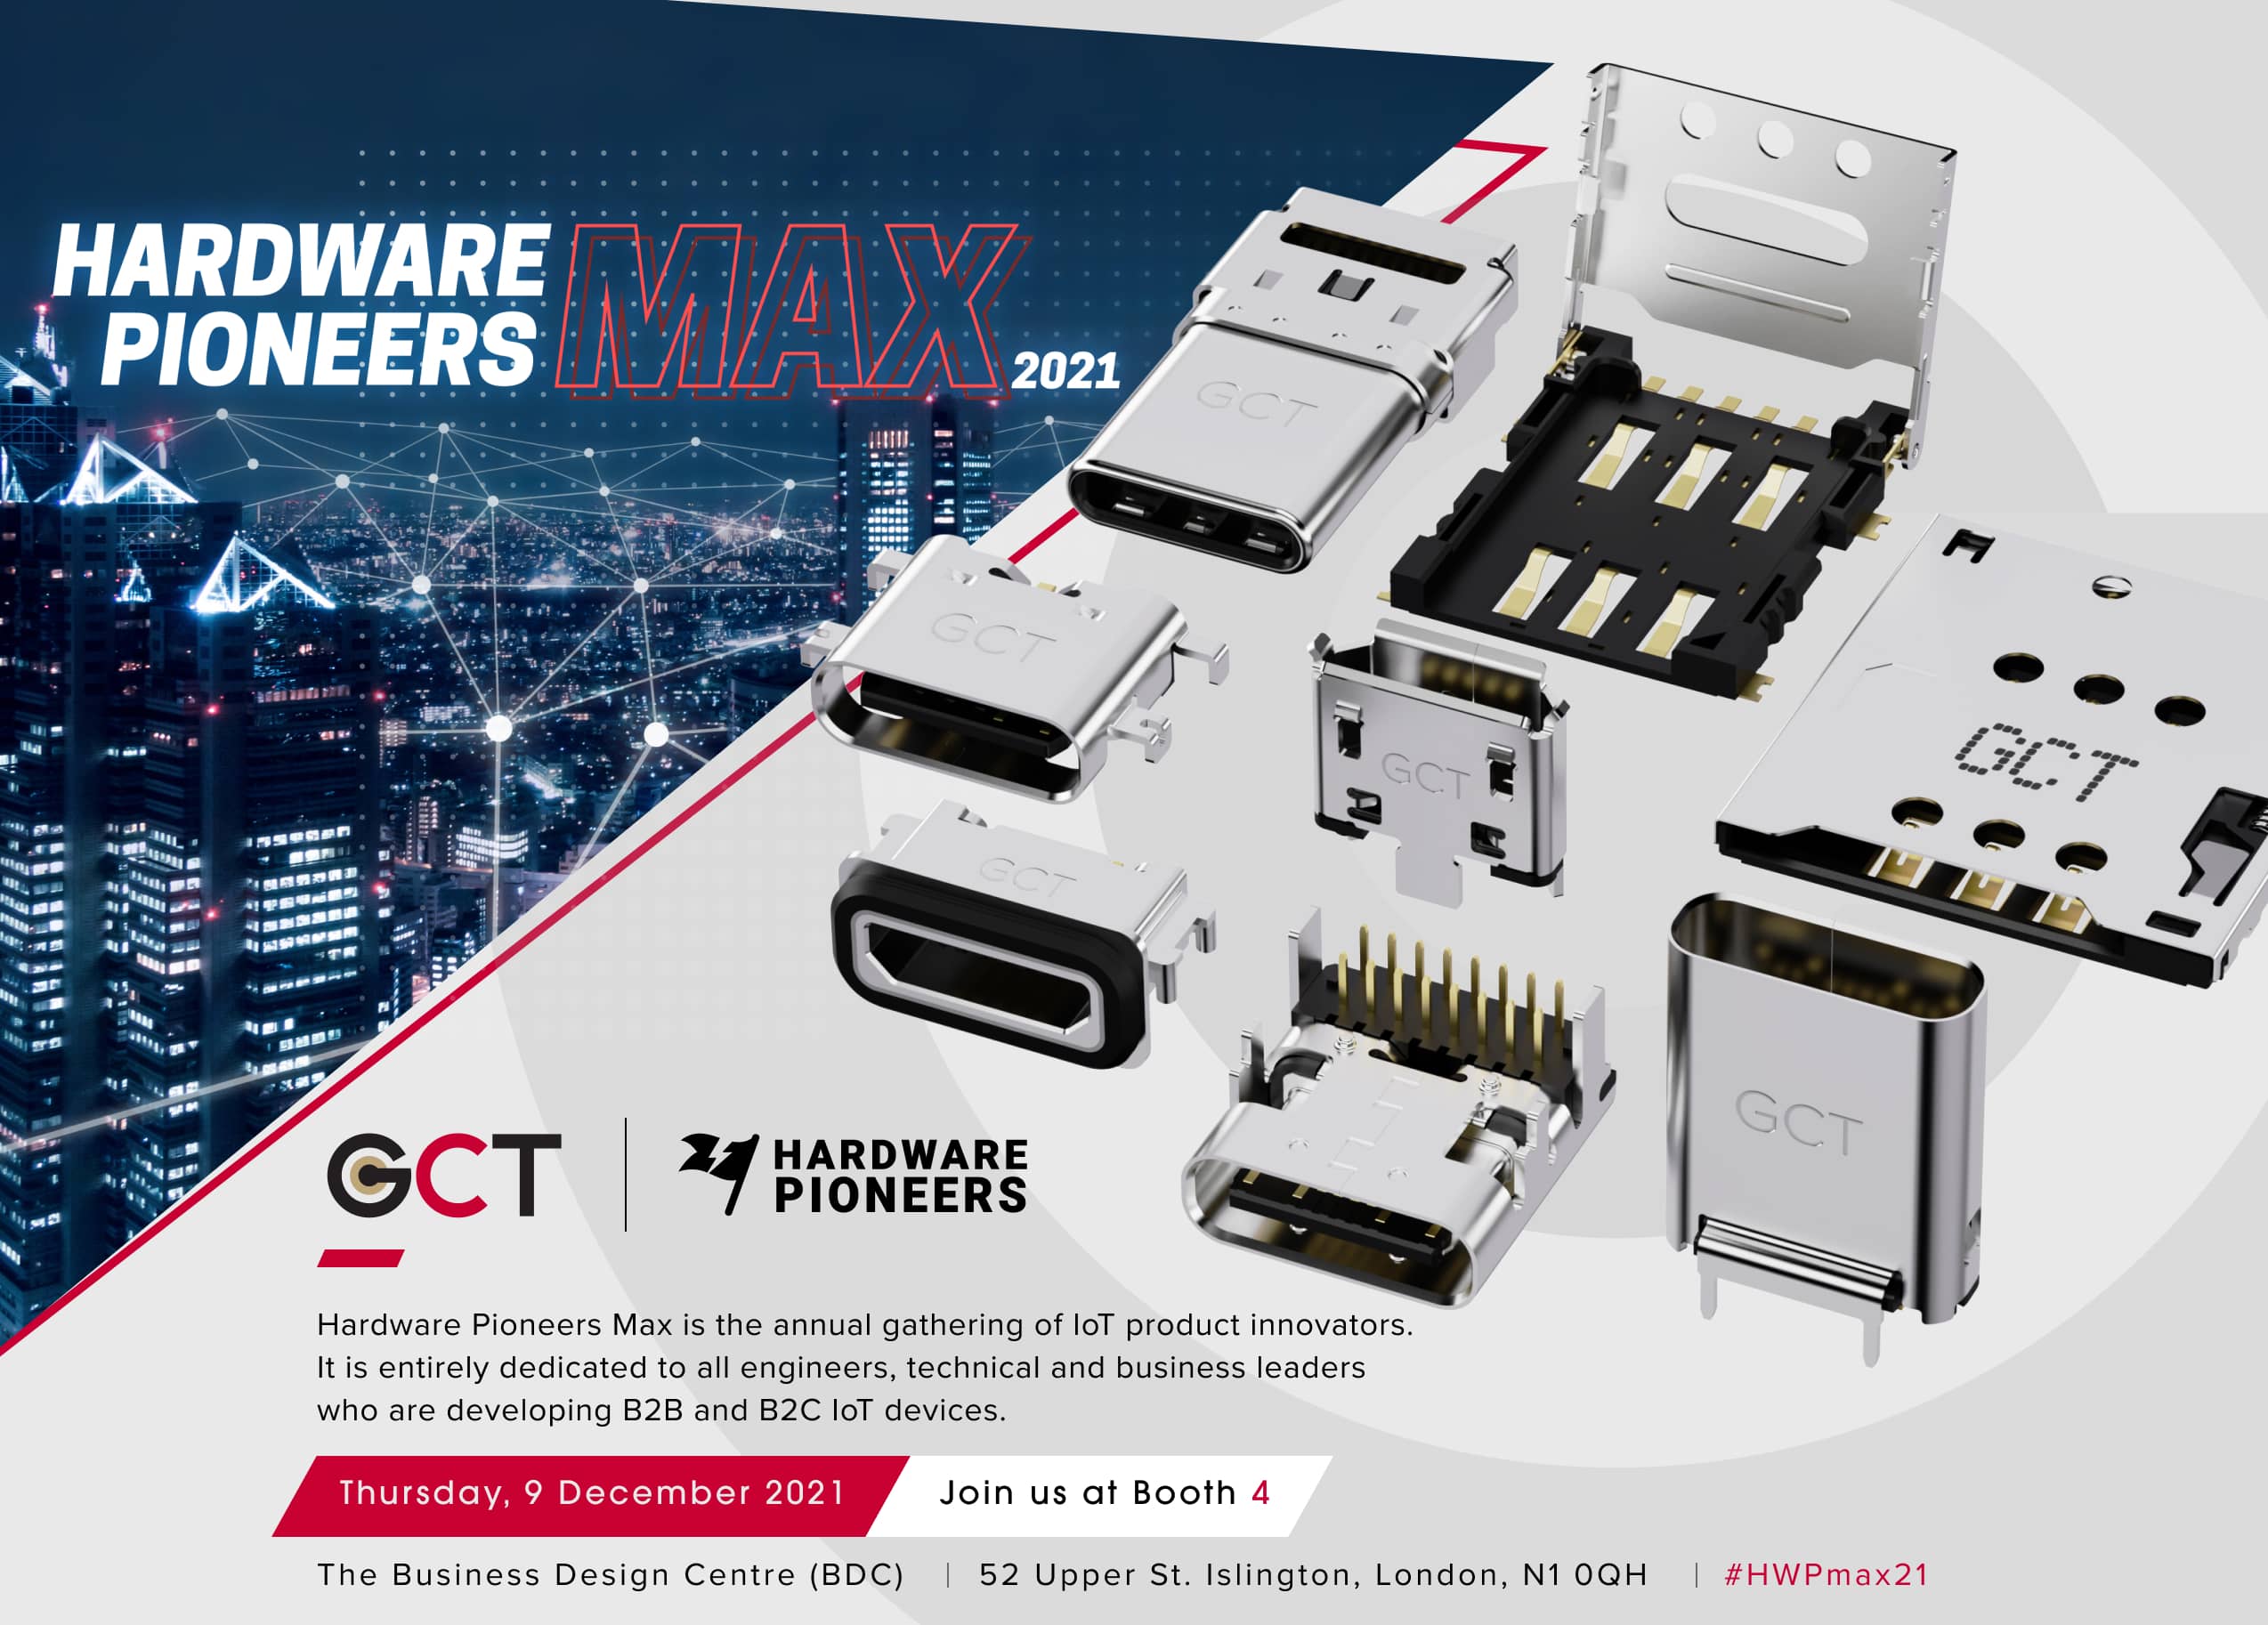 Come join GCT at Hardware Pioneers Max 2021